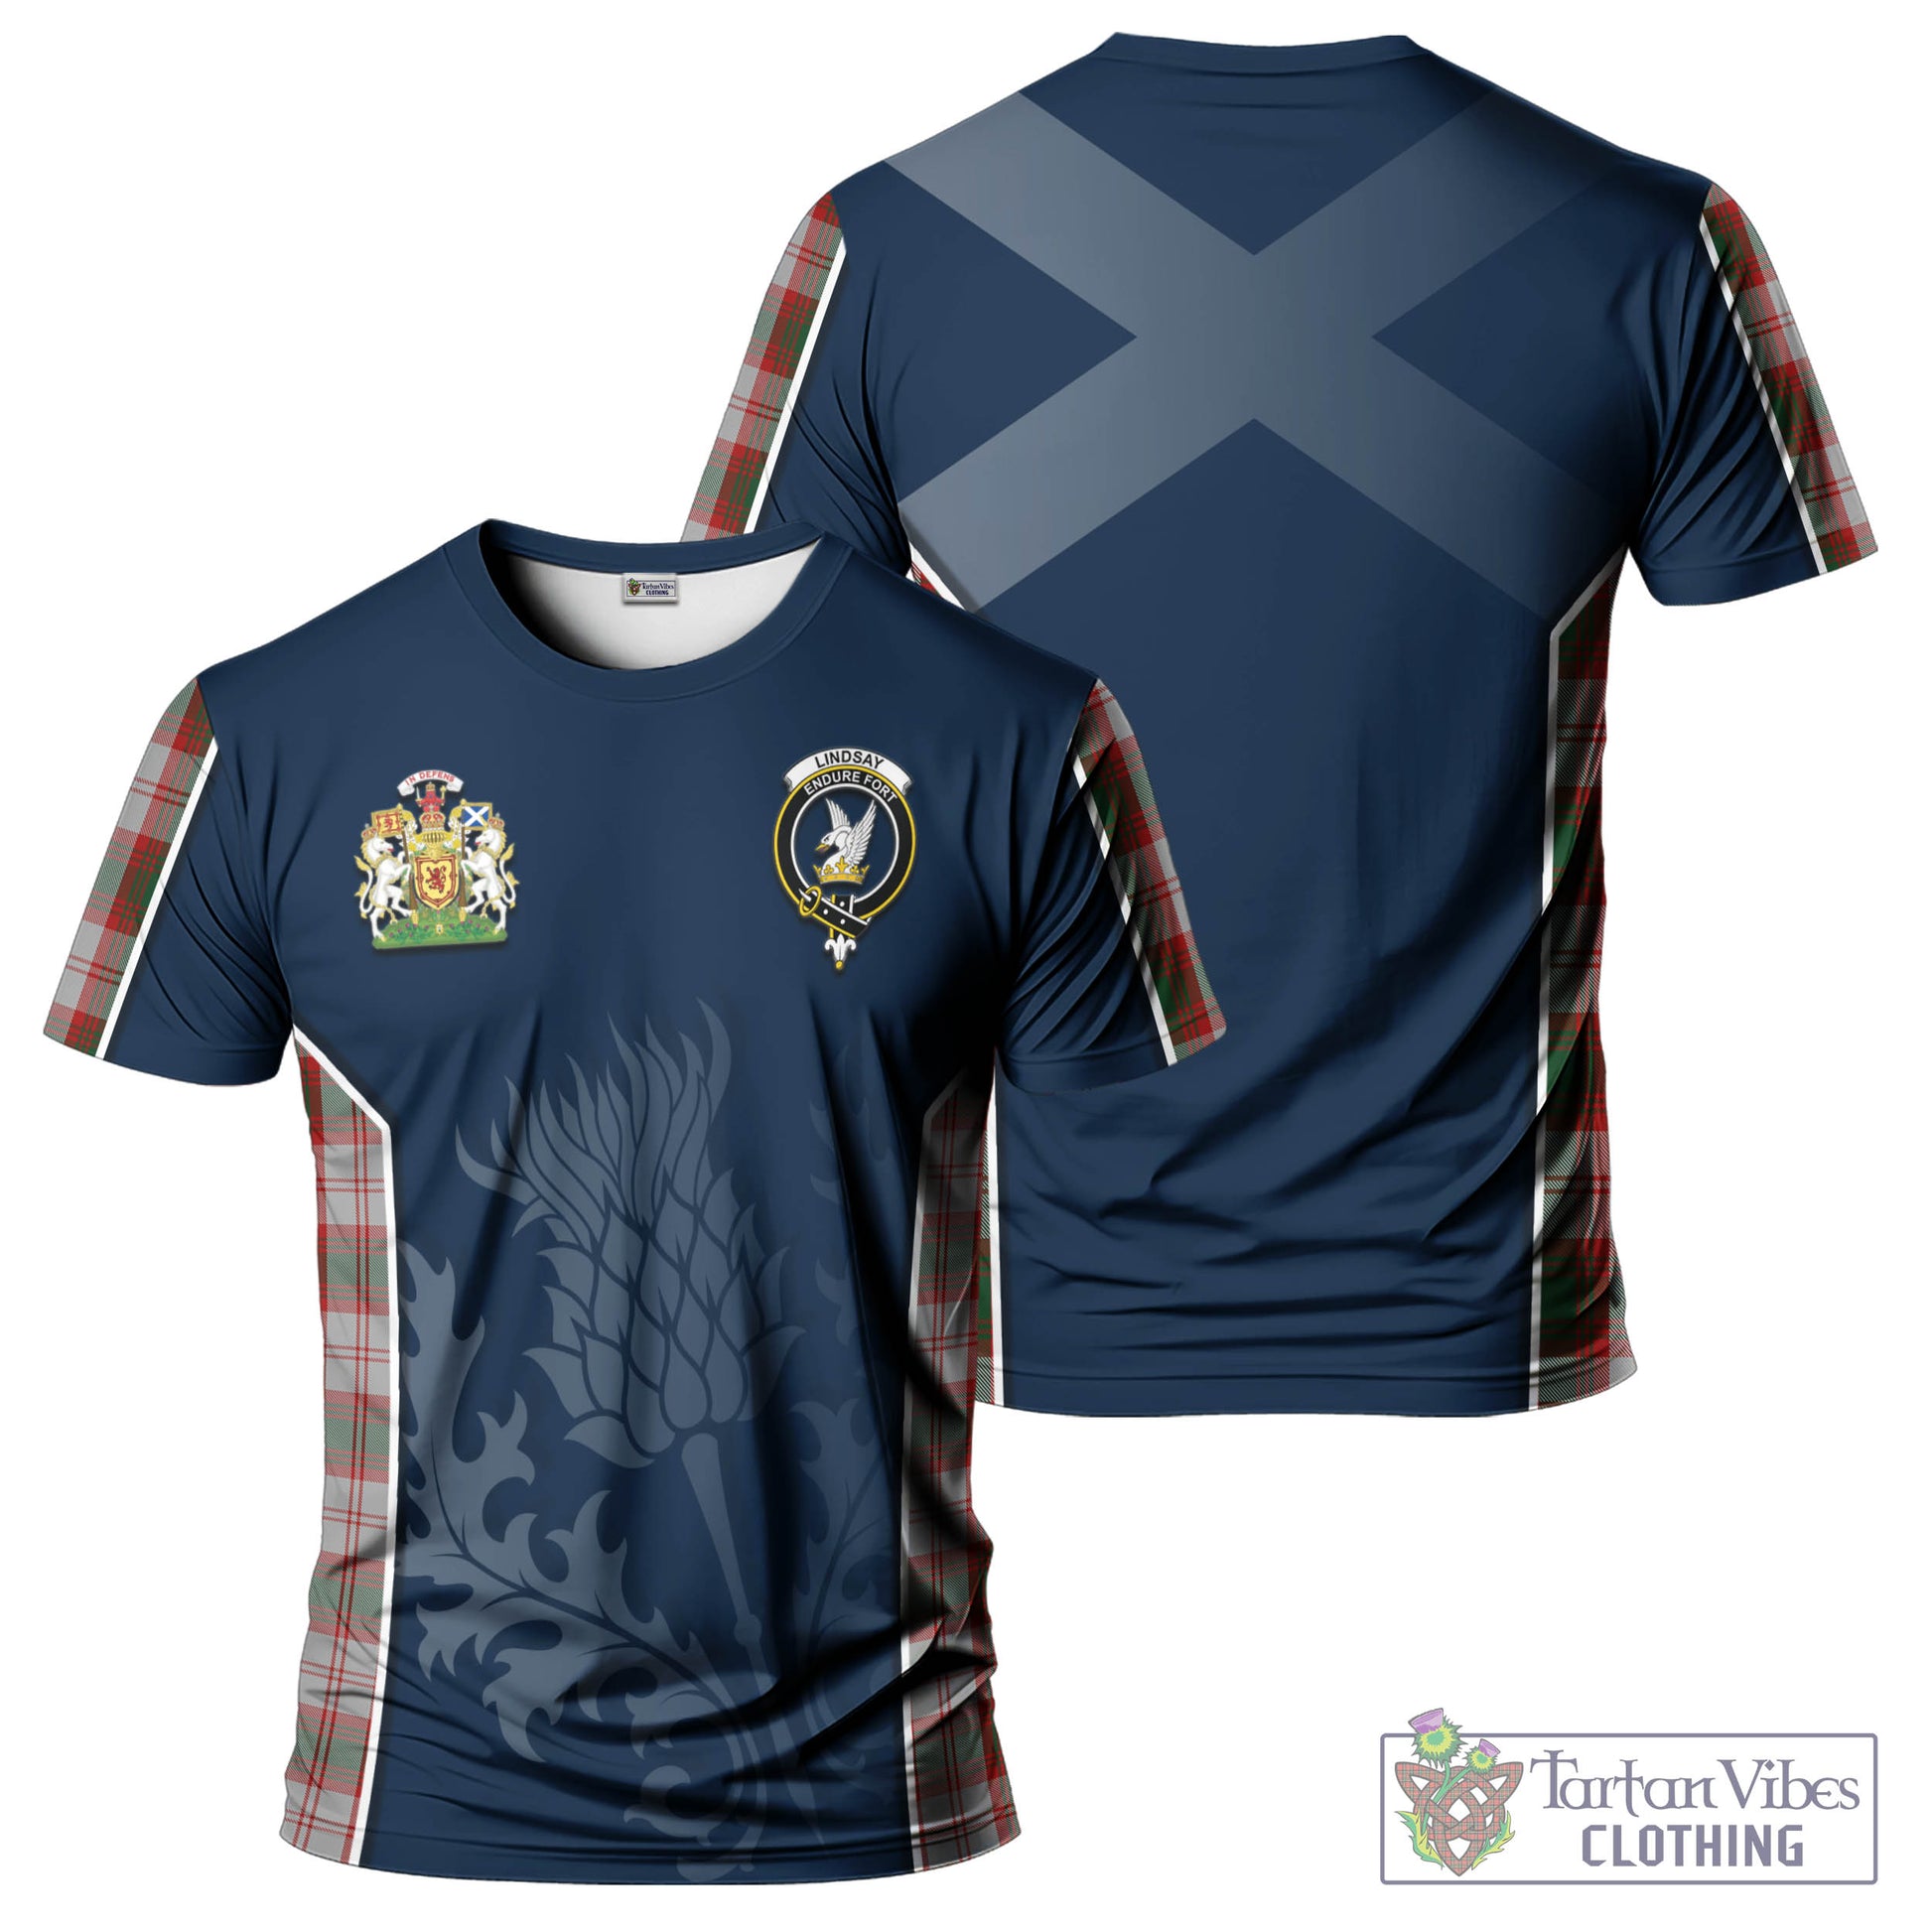 Tartan Vibes Clothing Lindsay Dress Red Tartan T-Shirt with Family Crest and Scottish Thistle Vibes Sport Style